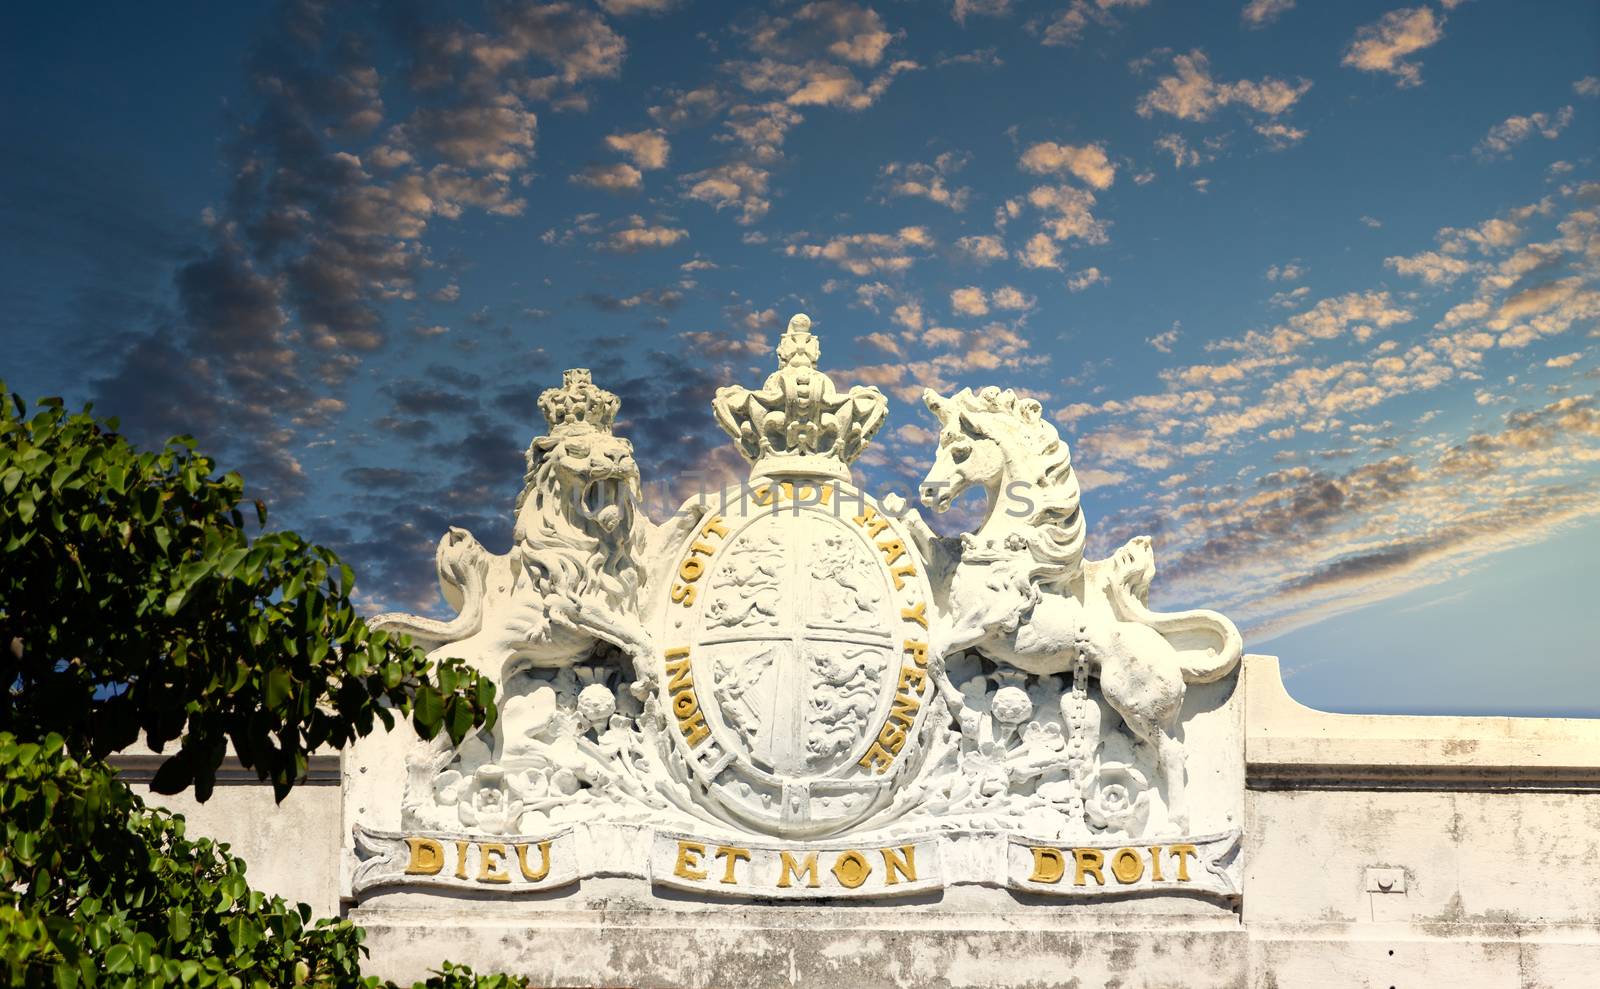 An Old Crest on Bank in Nassau Bahamas